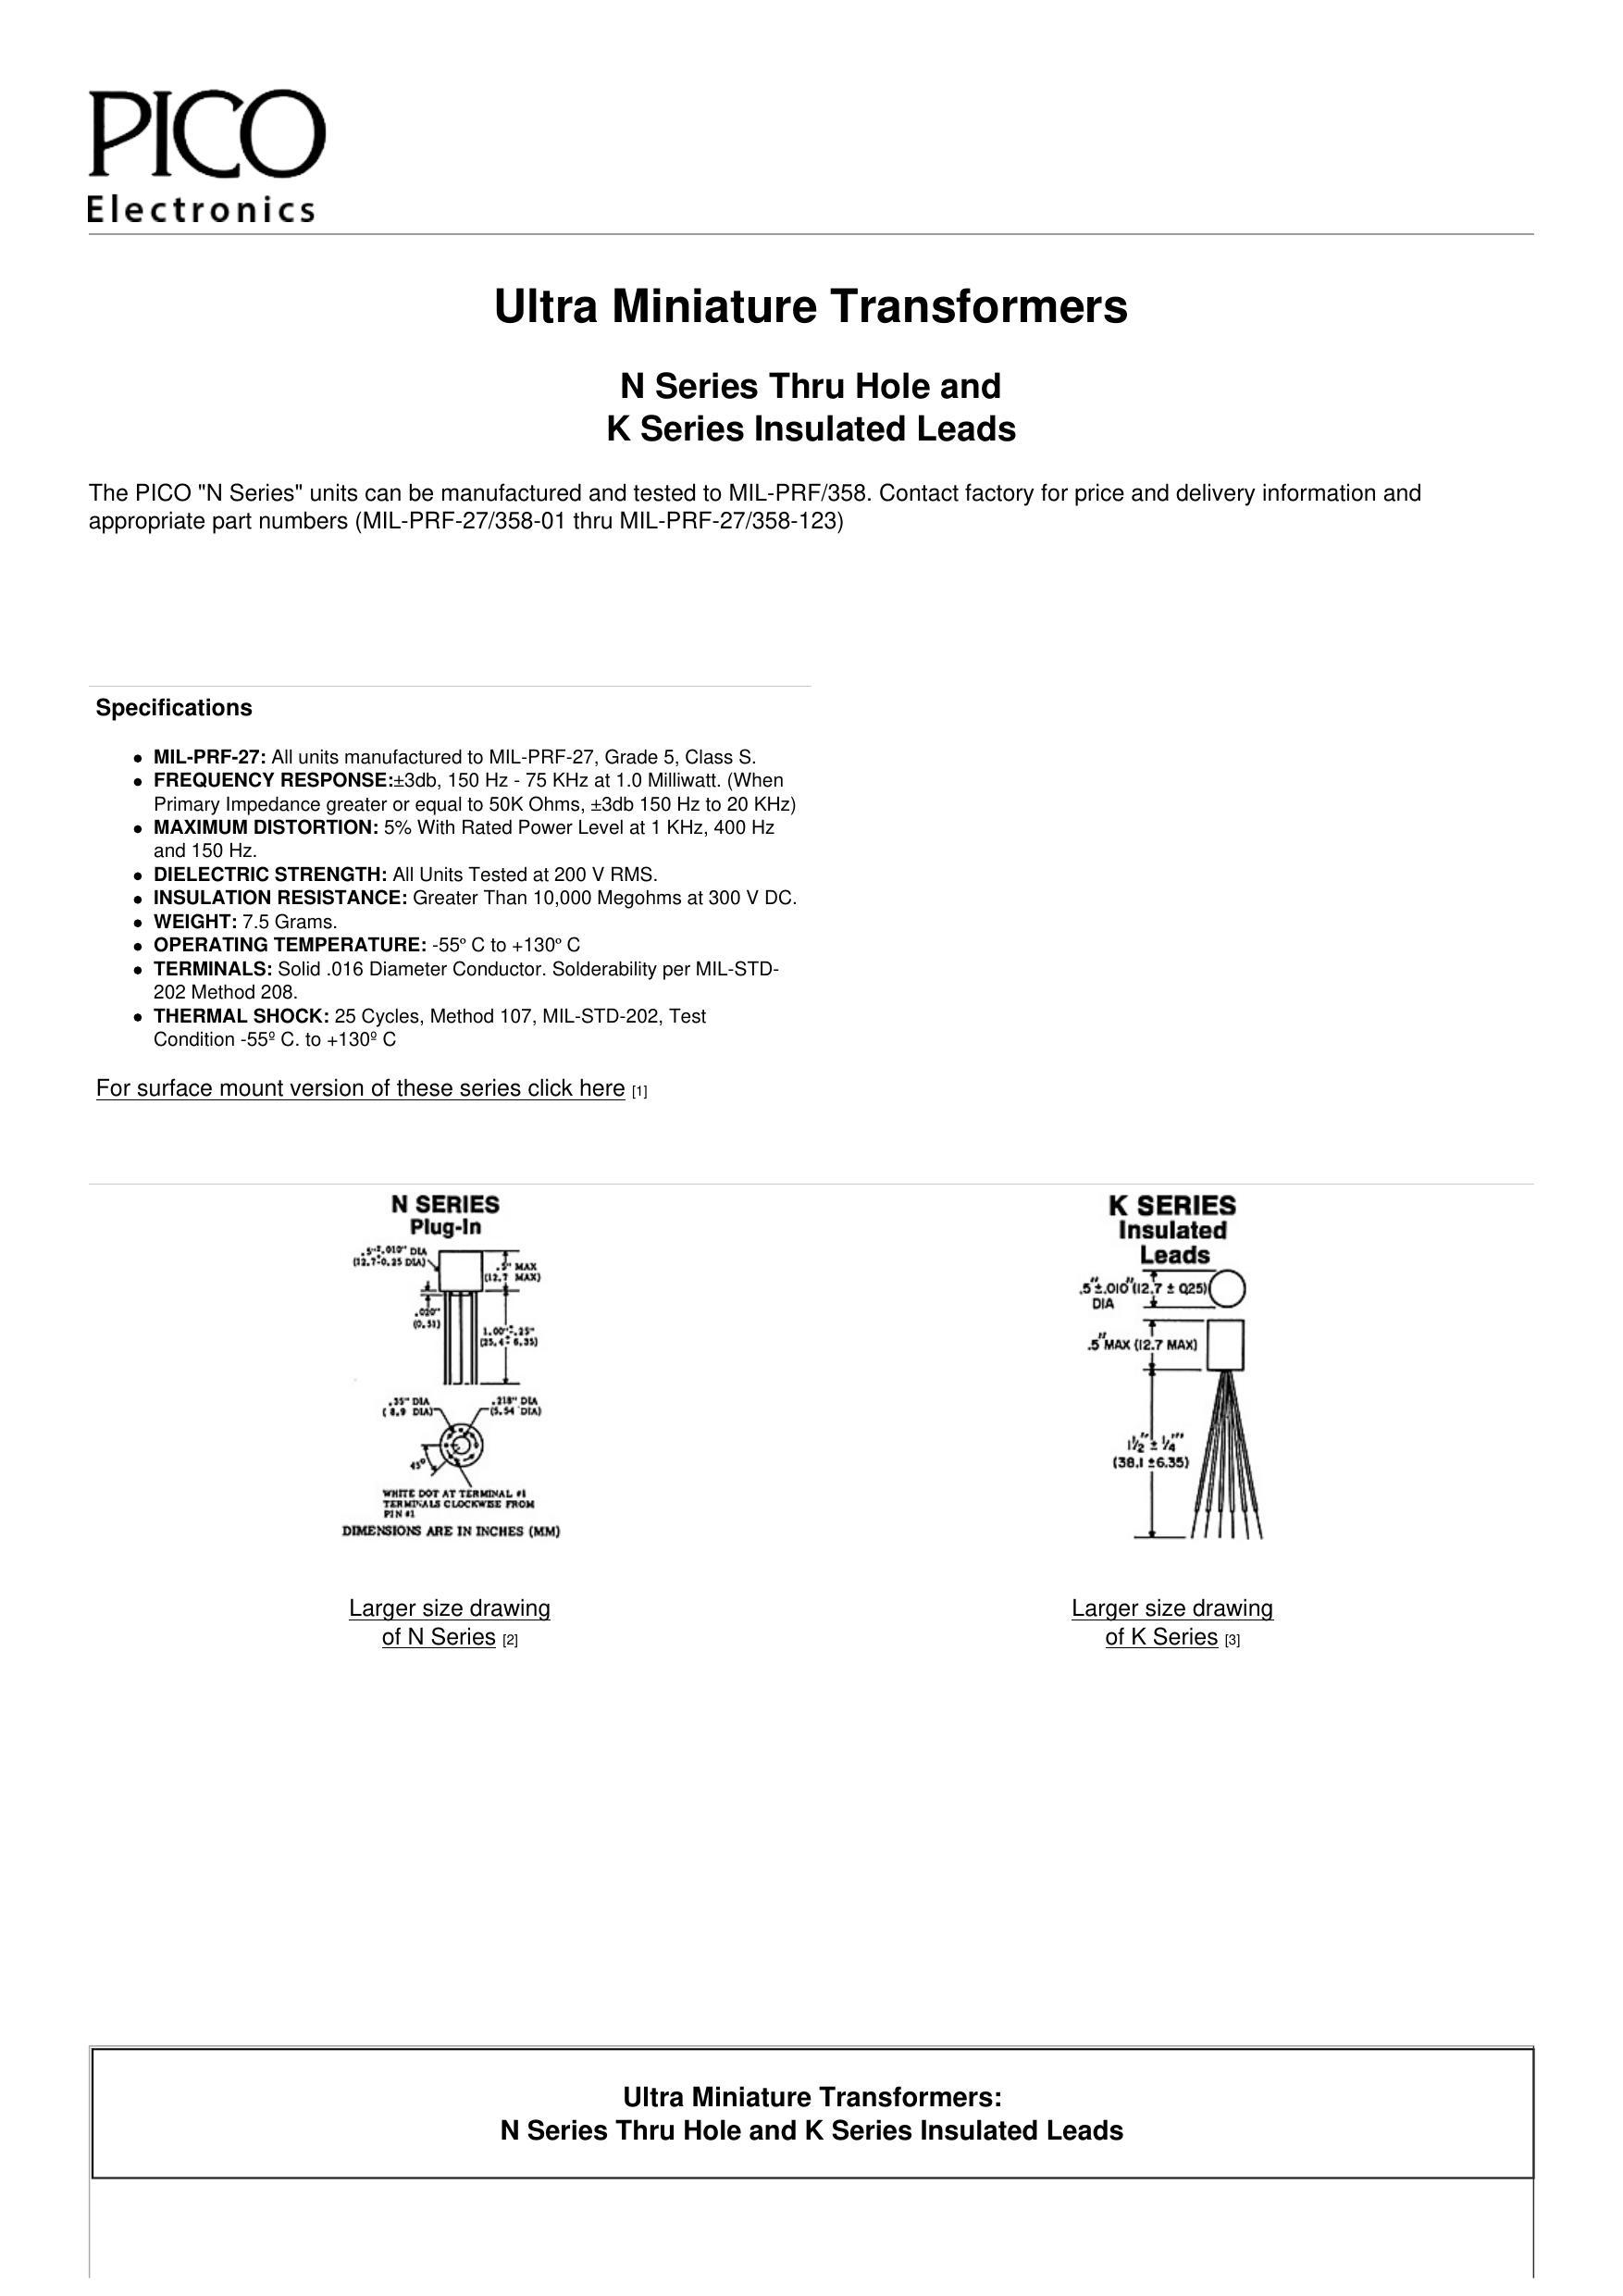 ultra-miniature-transformers-n-series-thru-hole-and-k-series-insulated-leads.pdf